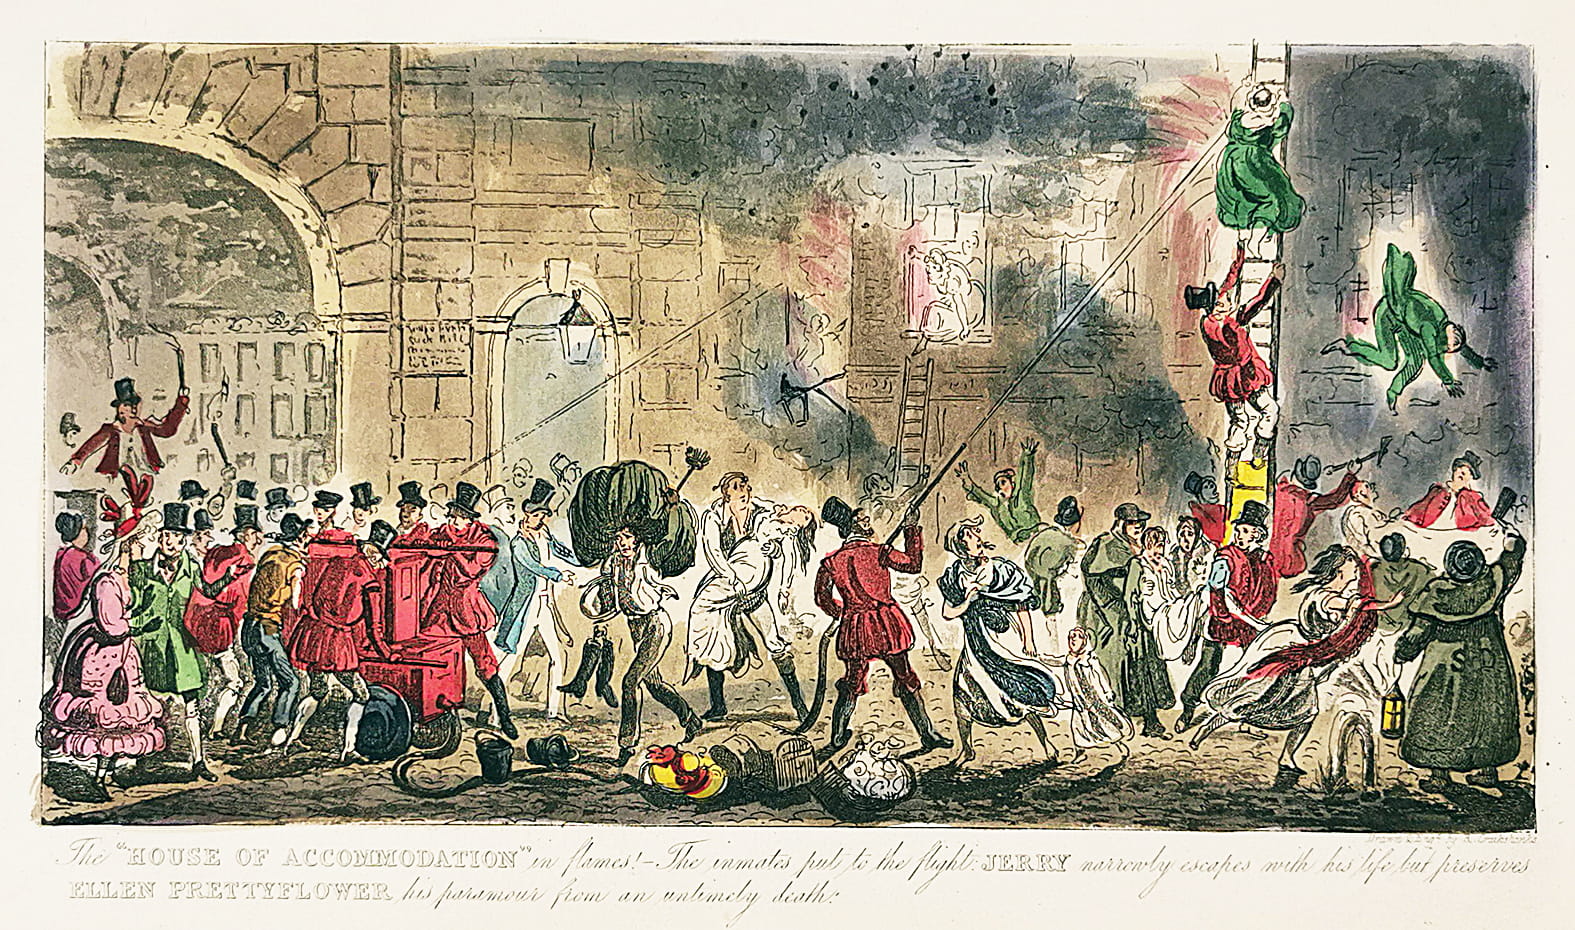 The 'House of Accommodation' in Flames! The Inmates put to flight - Antique Print from 1821